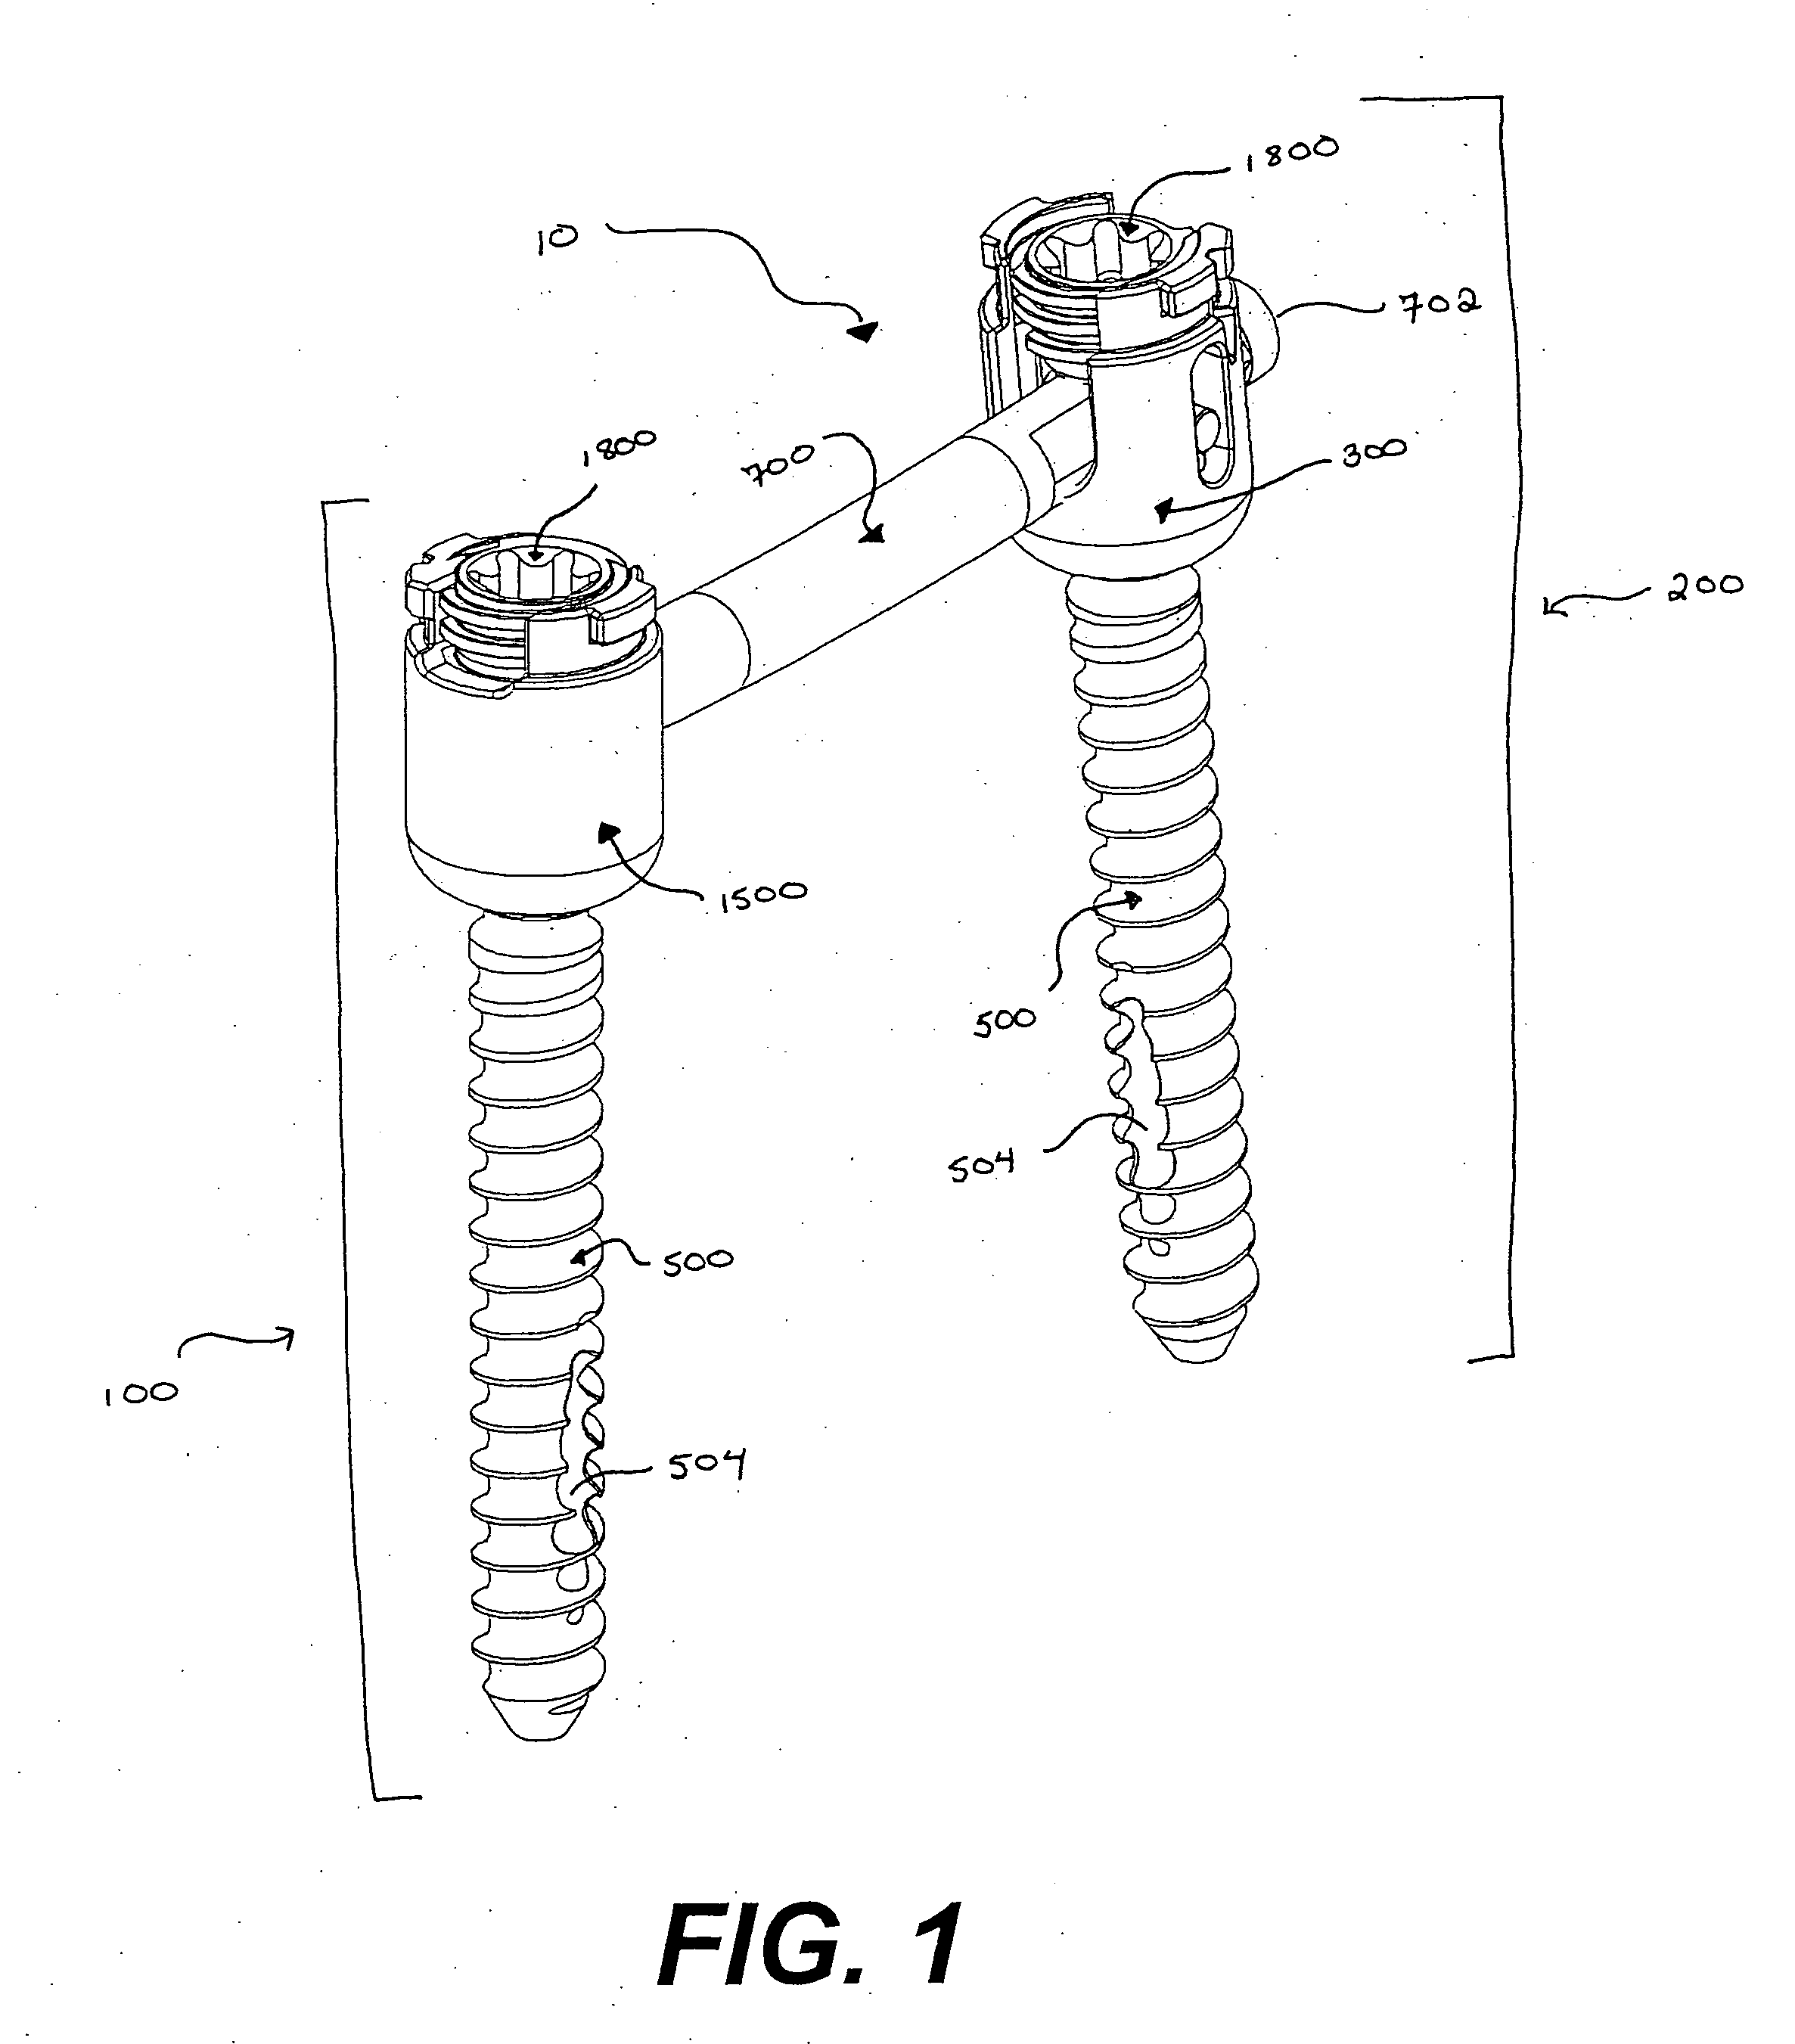 Extension for use with stabilization systems for internal structures